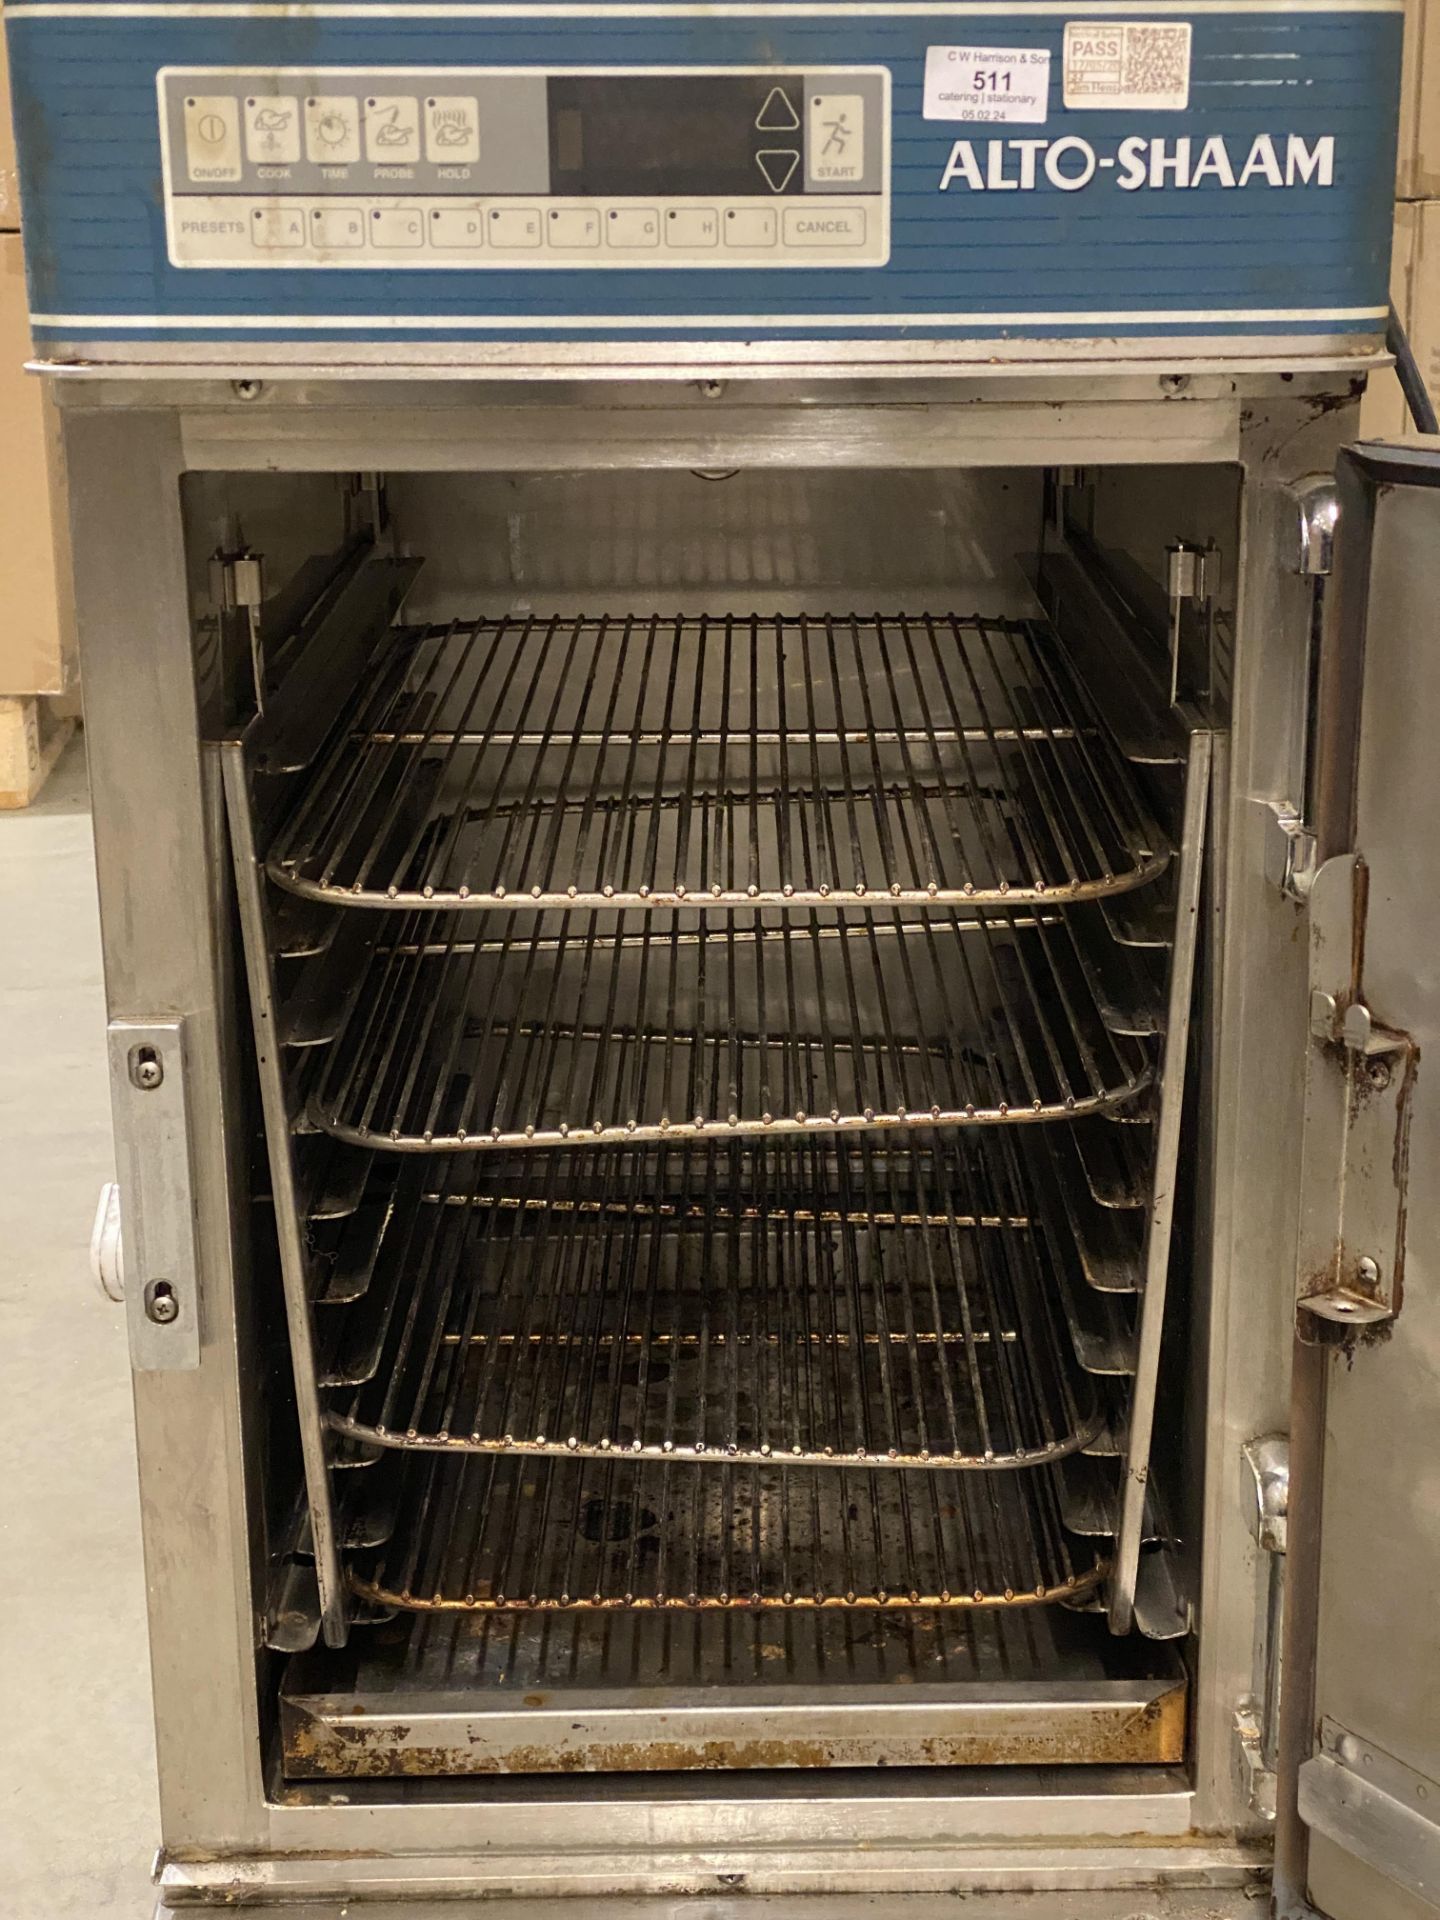 Alto-Shaam model: 500-TH-111 stainless steel Halo Heat mobile electric oven (240v - failed PAT - Image 5 of 5